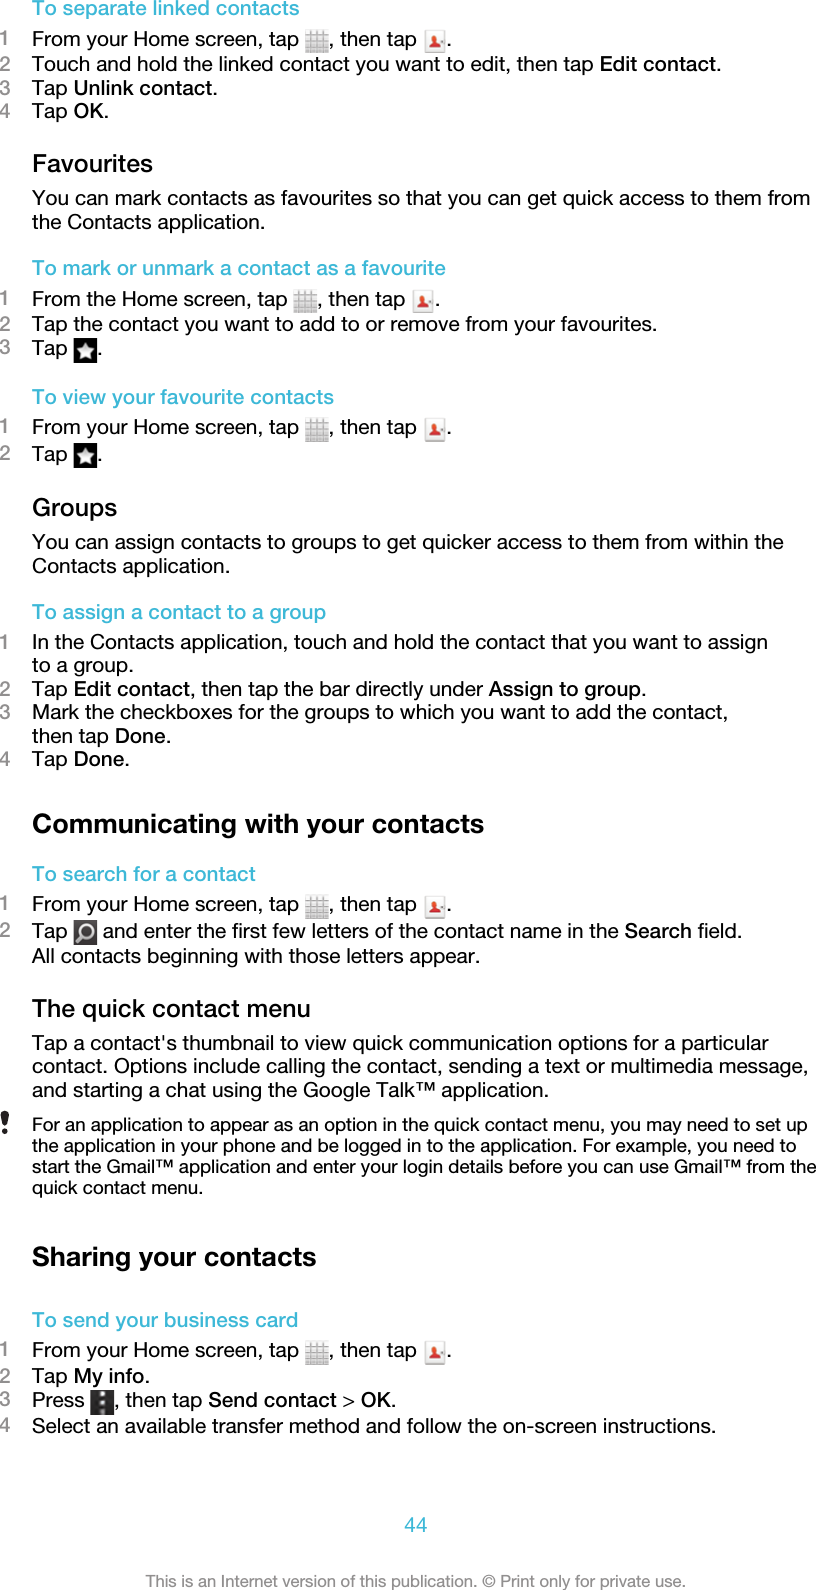 To separate linked contacts1From your Home screen, tap  , then tap  .2Touch and hold the linked contact you want to edit, then tap Edit contact.3Tap Unlink contact.4Tap OK.FavouritesYou can mark contacts as favourites so that you can get quick access to them fromthe Contacts application.To mark or unmark a contact as a favourite1From the Home screen, tap  , then tap  .2Tap the contact you want to add to or remove from your favourites.3Tap  .To view your favourite contacts1From your Home screen, tap  , then tap  .2Tap  .GroupsYou can assign contacts to groups to get quicker access to them from within theContacts application.To assign a contact to a group1In the Contacts application, touch and hold the contact that you want to assignto a group.2Tap Edit contact, then tap the bar directly under Assign to group.3Mark the checkboxes for the groups to which you want to add the contact,then tap Done.4Tap Done.Communicating with your contactsTo search for a contact1From your Home screen, tap  , then tap  .2Tap   and enter the first few letters of the contact name in the Search field.All contacts beginning with those letters appear.The quick contact menuTap a contact&apos;s thumbnail to view quick communication options for a particularcontact. Options include calling the contact, sending a text or multimedia message,and starting a chat using the Google Talk™ application.For an application to appear as an option in the quick contact menu, you may need to set upthe application in your phone and be logged in to the application. For example, you need tostart the Gmail™ application and enter your login details before you can use Gmail™ from thequick contact menu.Sharing your contactsTo send your business card1From your Home screen, tap  , then tap  .2Tap My info.3Press  , then tap Send contact &gt; OK.4Select an available transfer method and follow the on-screen instructions.44This is an Internet version of this publication. © Print only for private use.